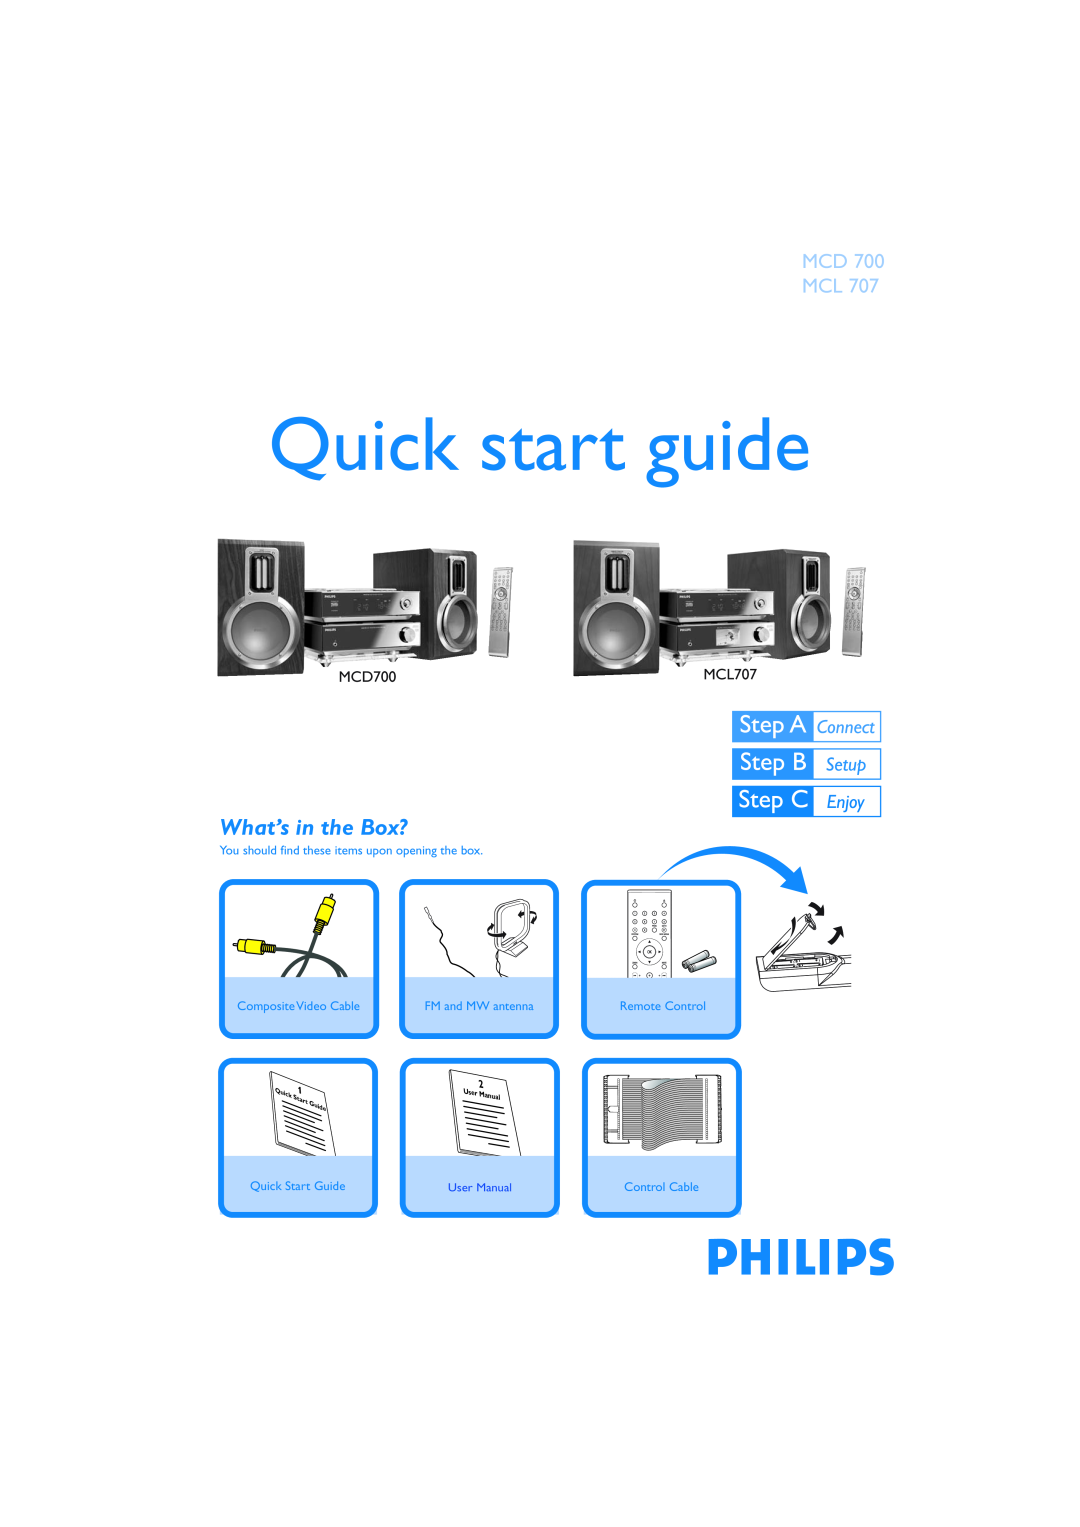 Philips MCL707 quick start What’s in the Box?, MCD700, Quick start guide, Mcd Mcl, Composite Video Cable, Remote Control 